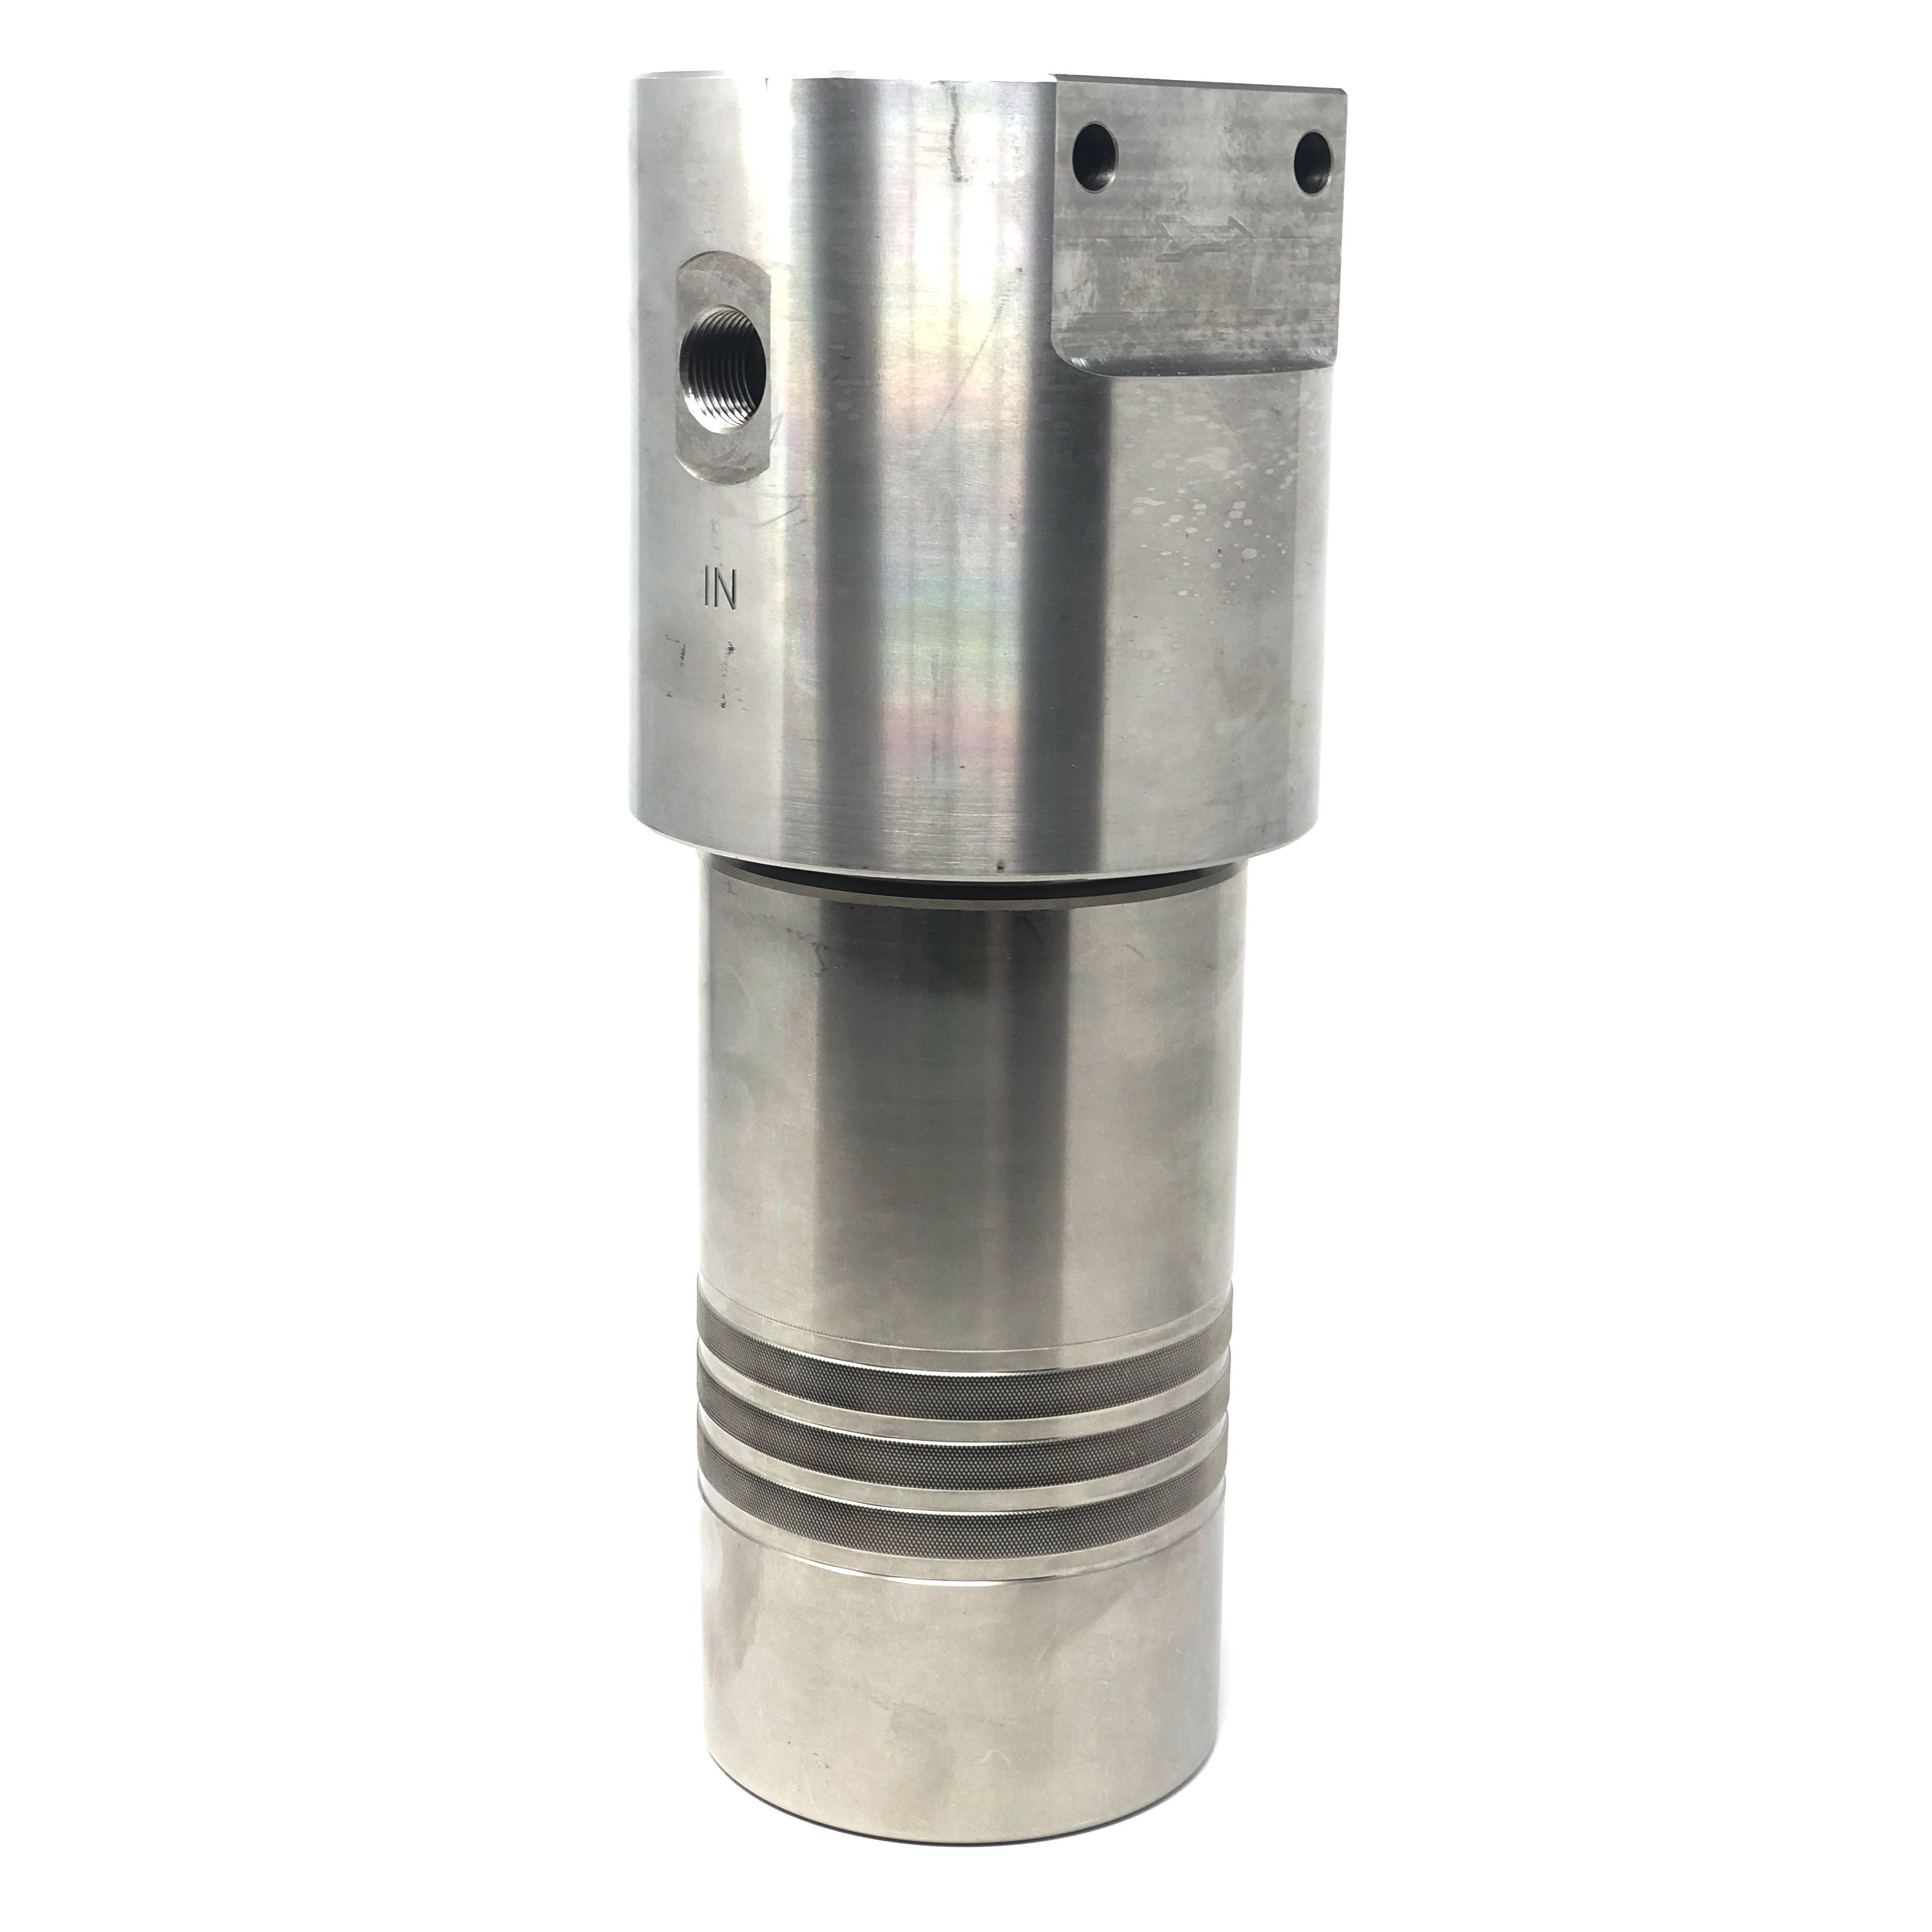 52S-168S-18SEN : Chase Ultra High Pressure Inline Filter, 10000psi, #8 SAE (1/2"), 18 Micron, With Visual Indicator, No Bypass